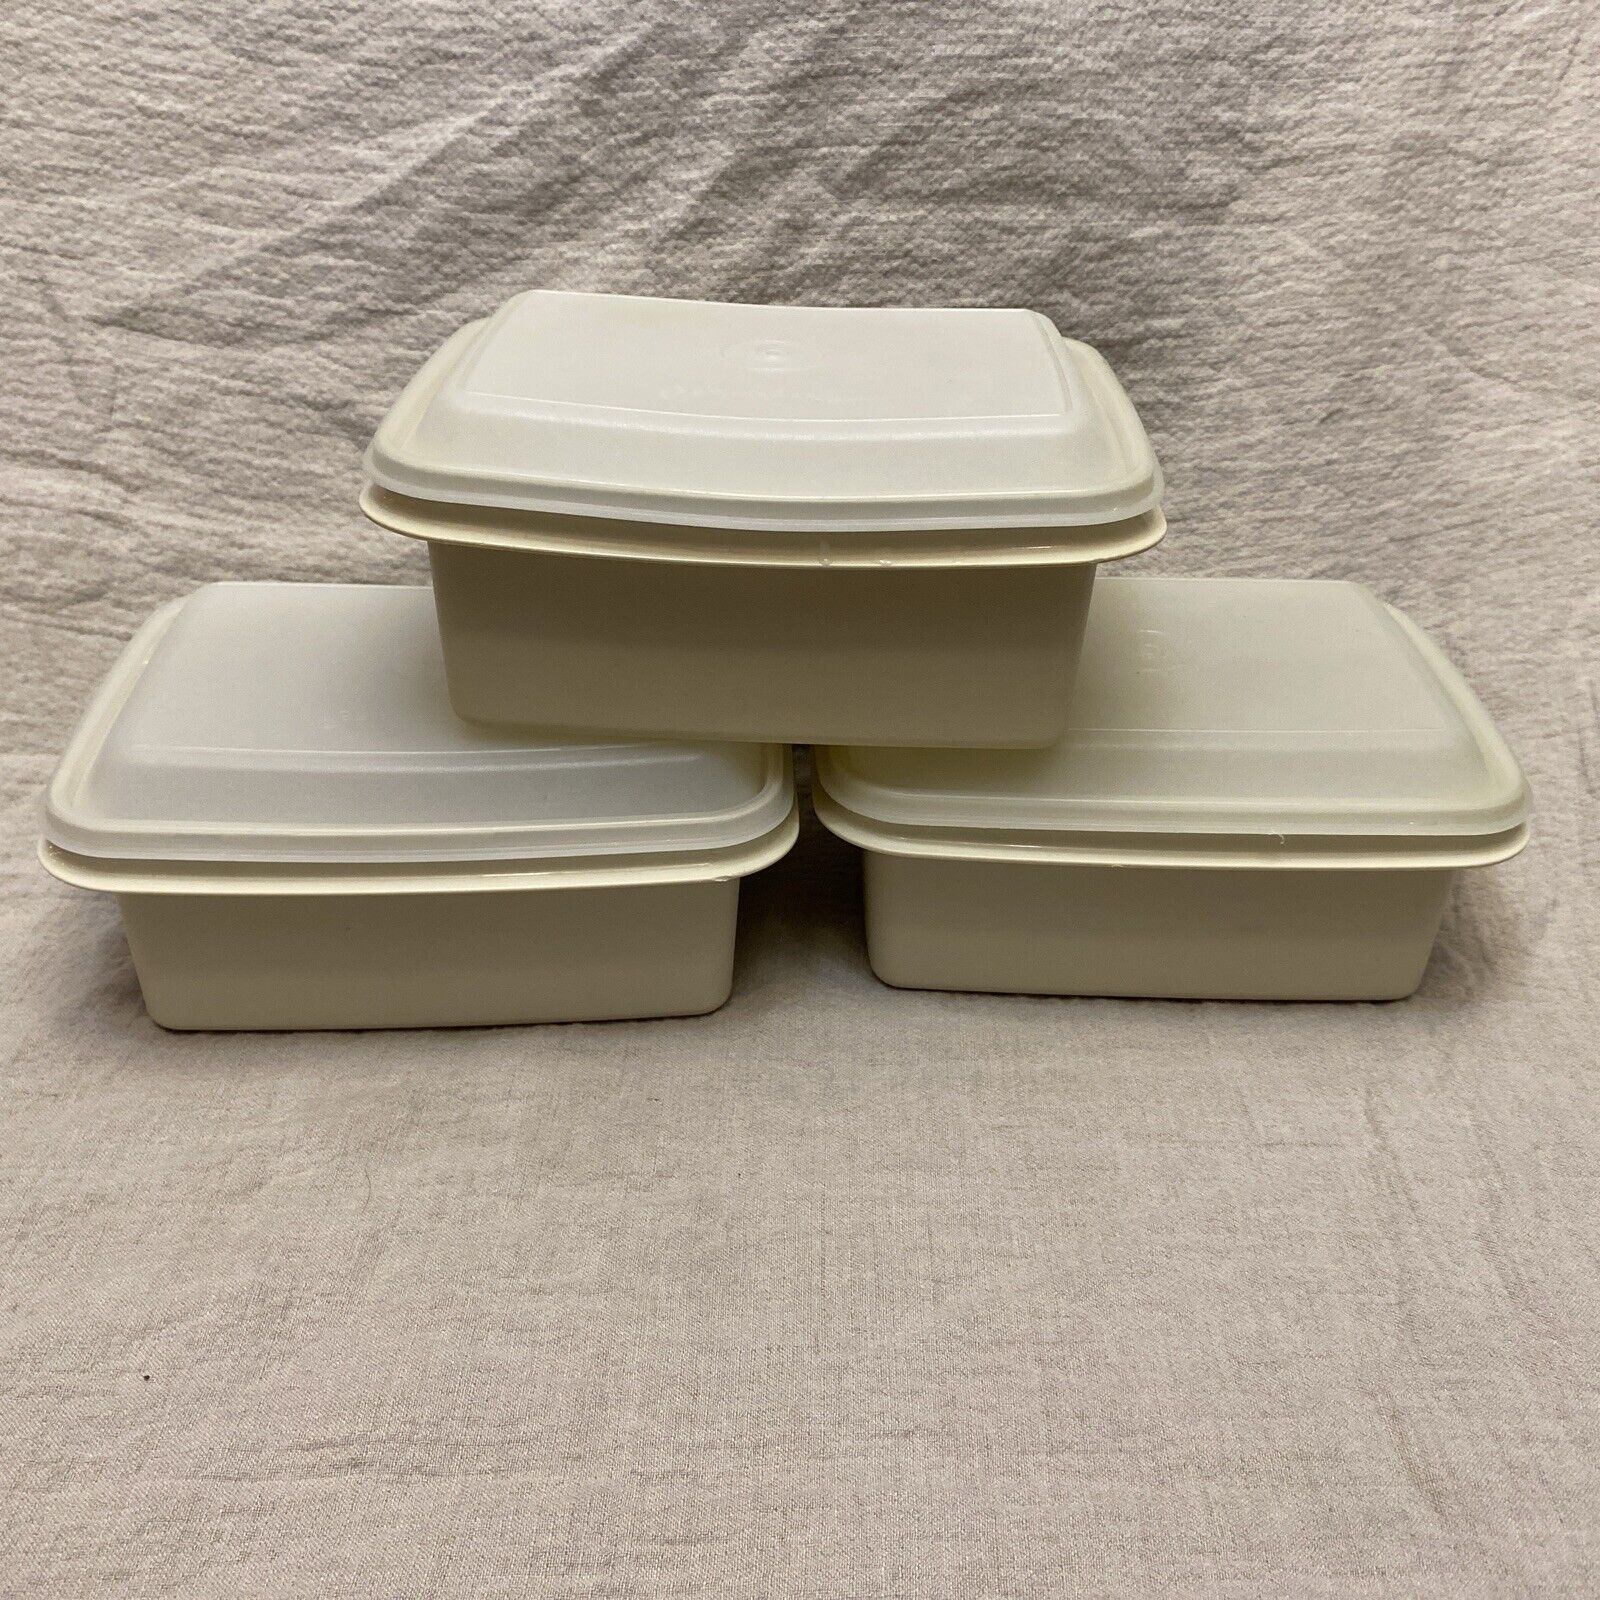 Vintage Tupperware Freeze And Save Ice Cream Keepers Lot Of 3 With Lids 